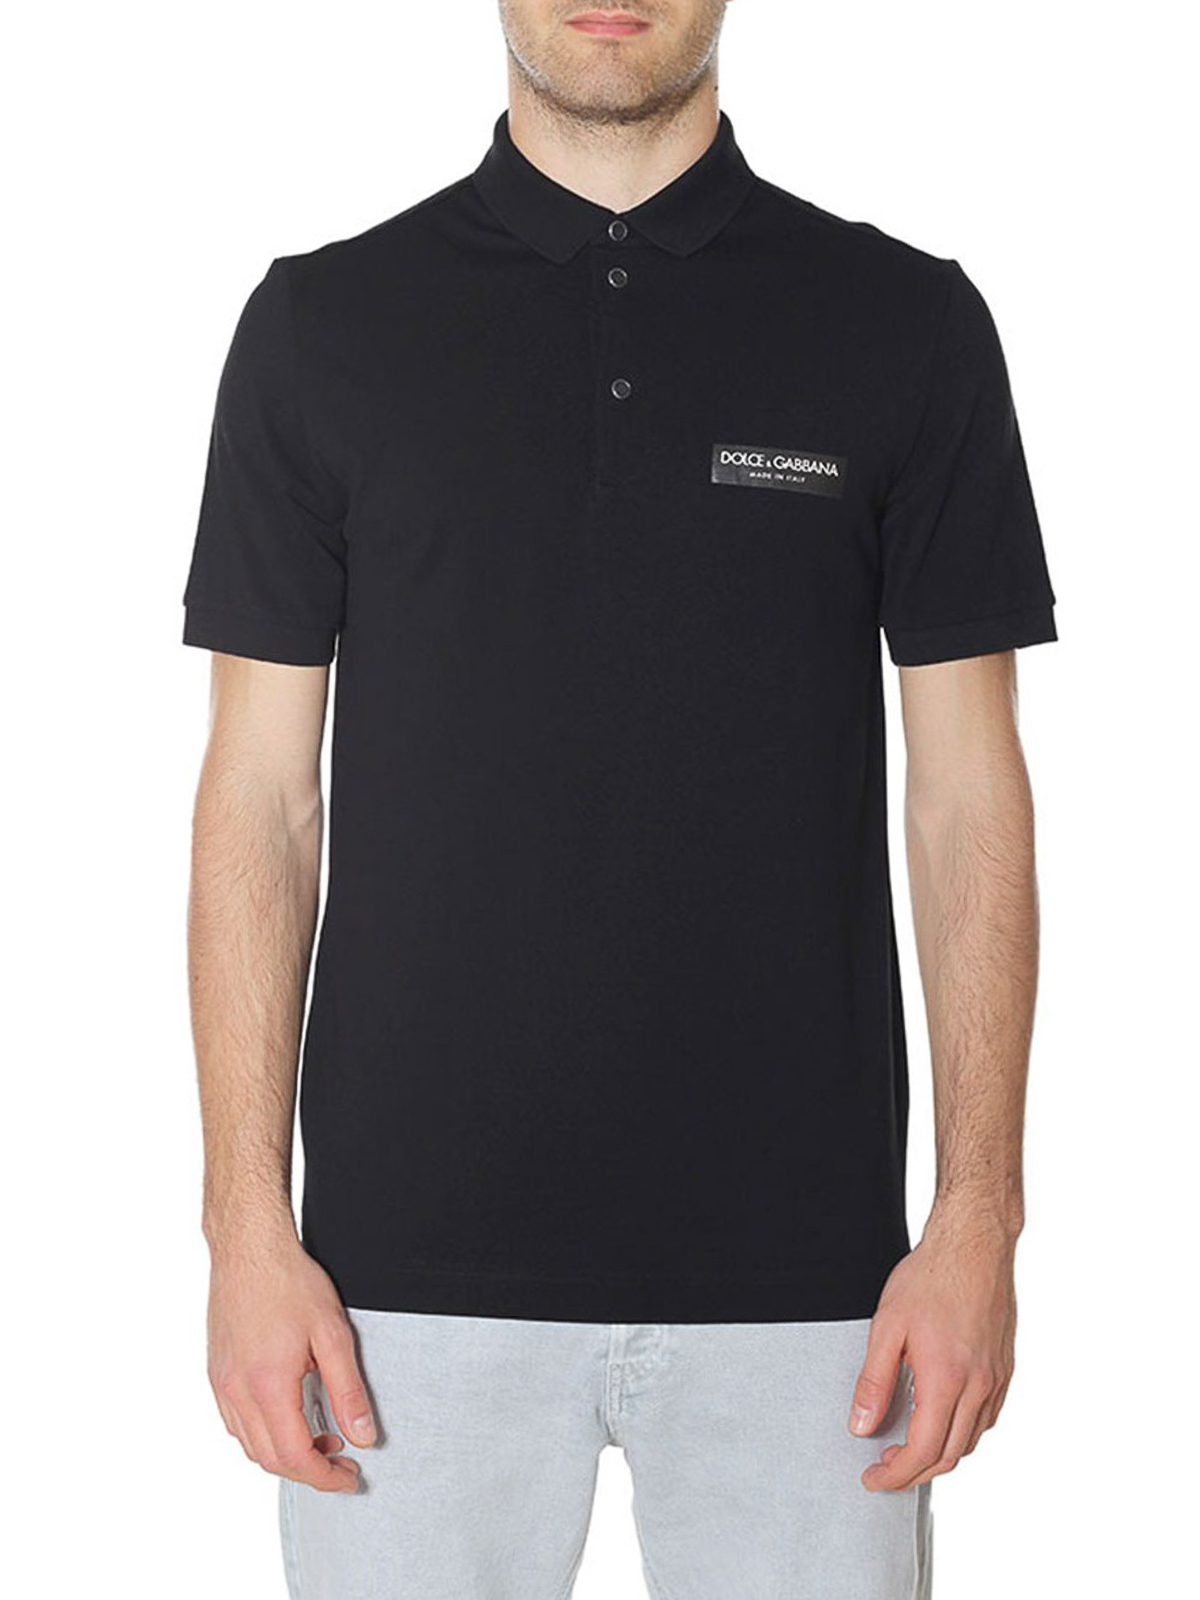 Top 63+ imagen dolce and gabbana polo t shirts - Abzlocal.mx